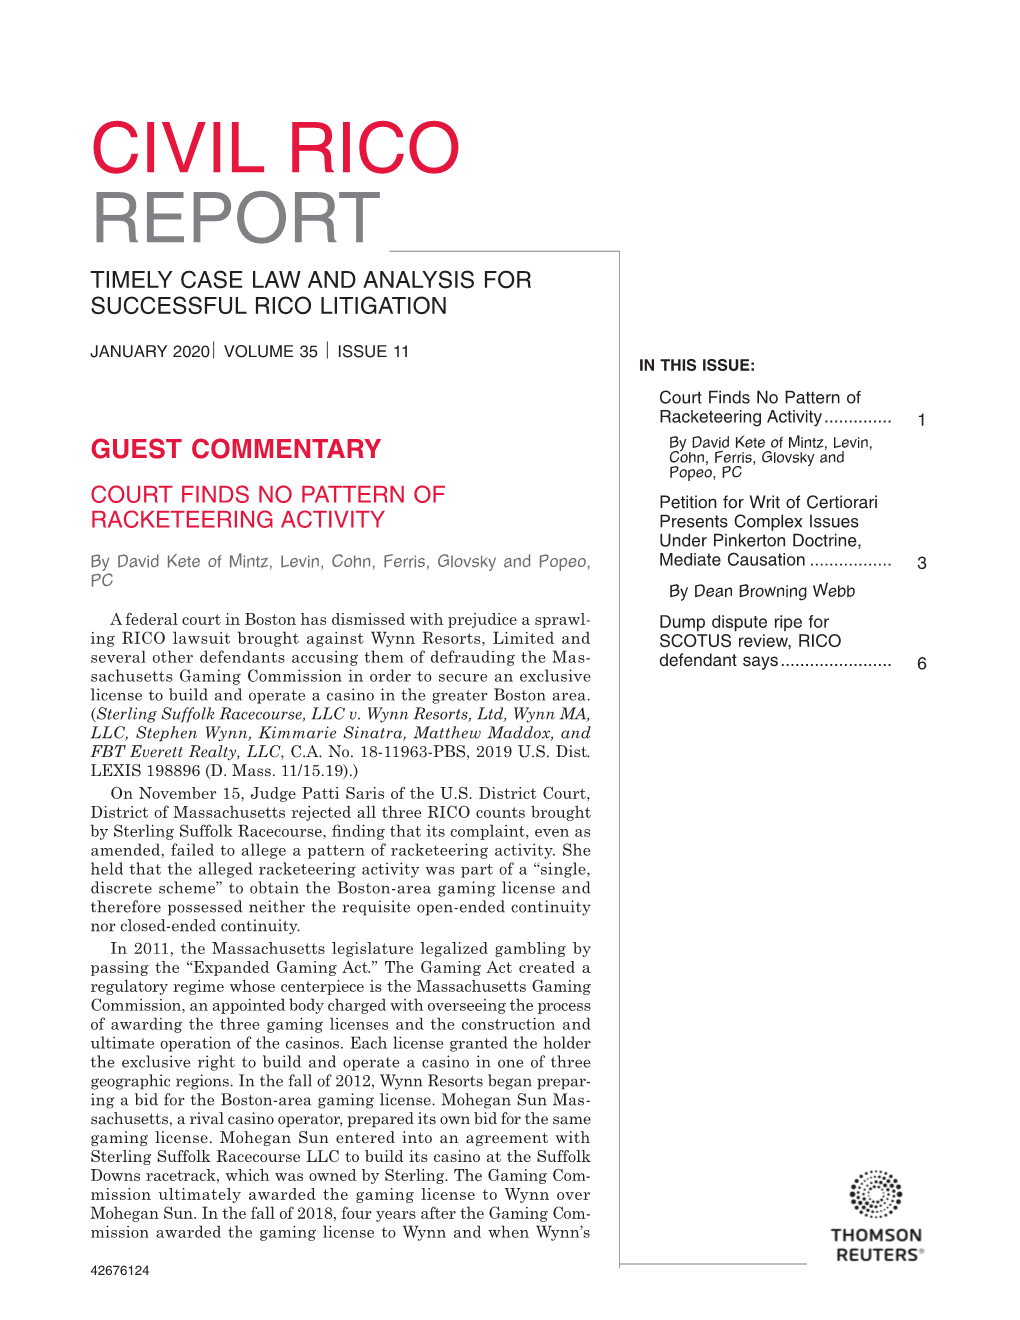 Civil Rico Report Timely Case Law and Analysis for Successful Rico Litigation